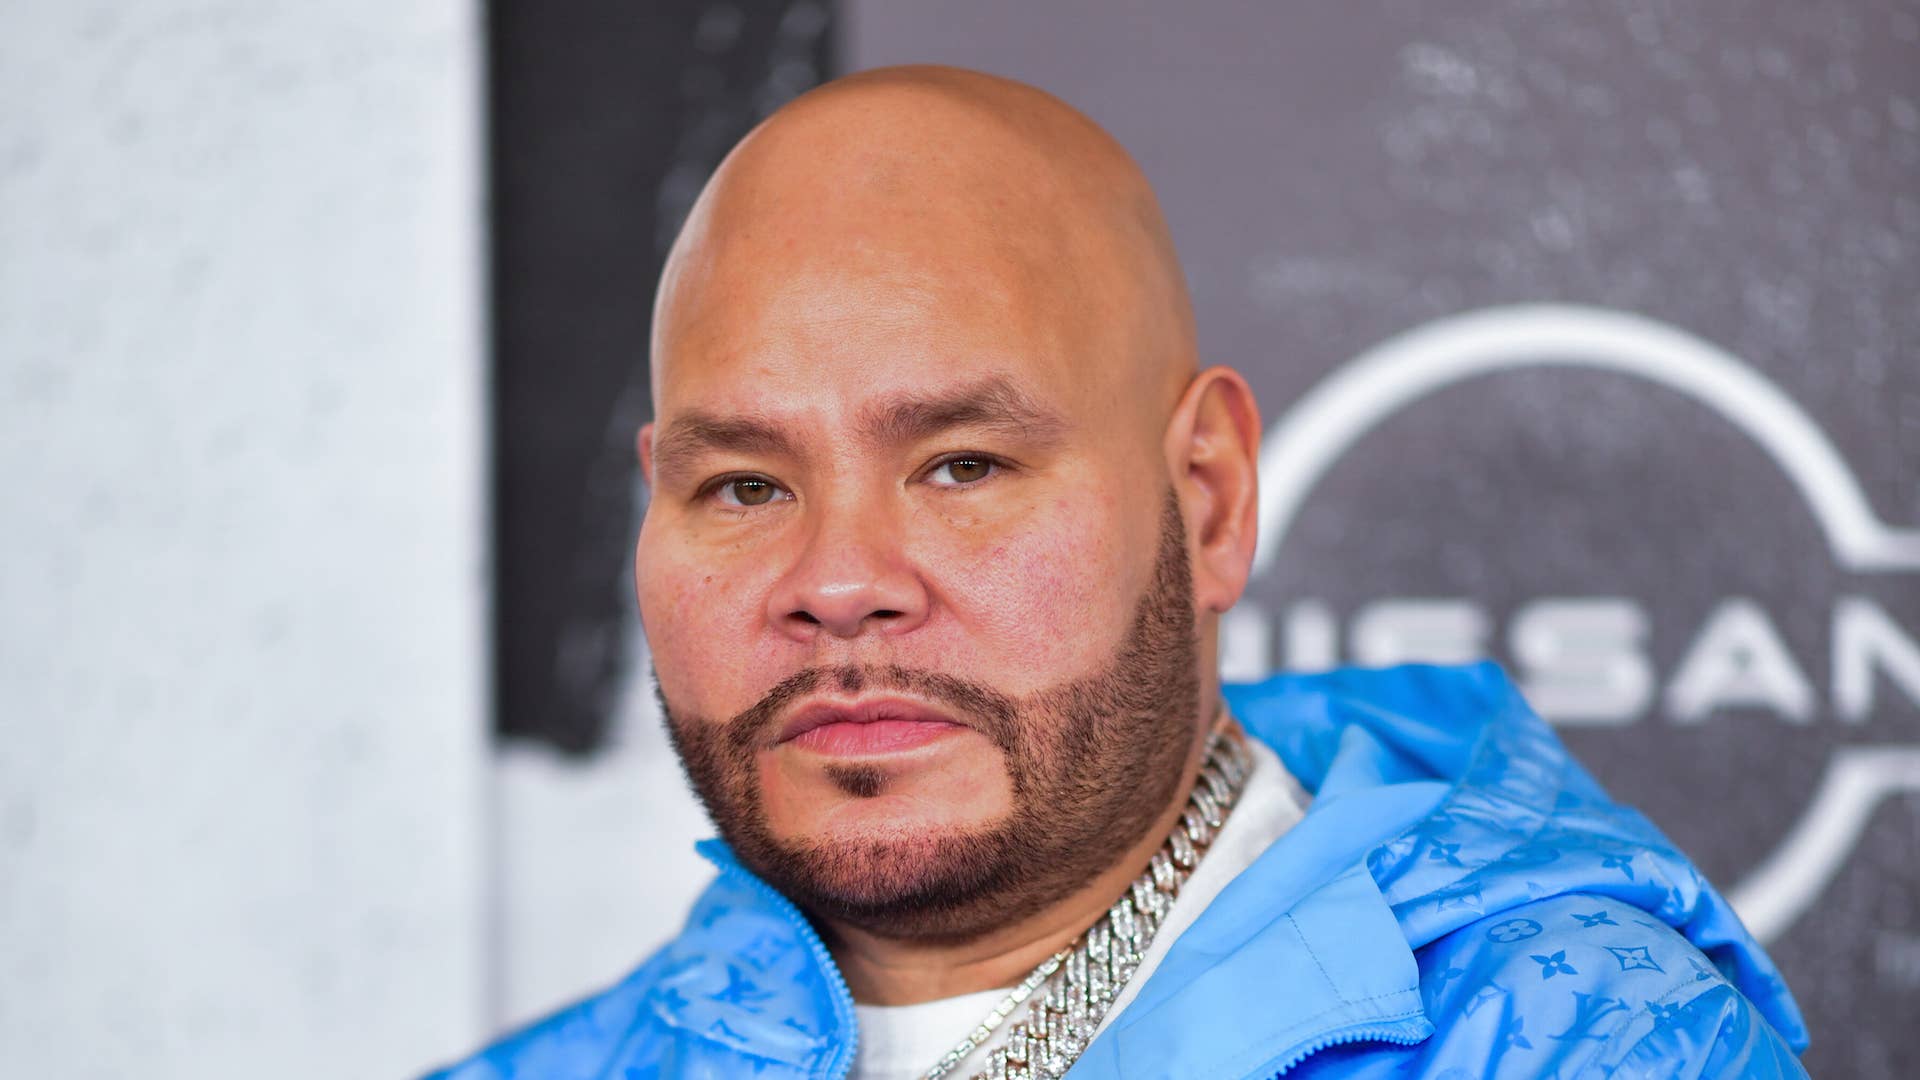 43 Facts About Fat Joe - Facts.net